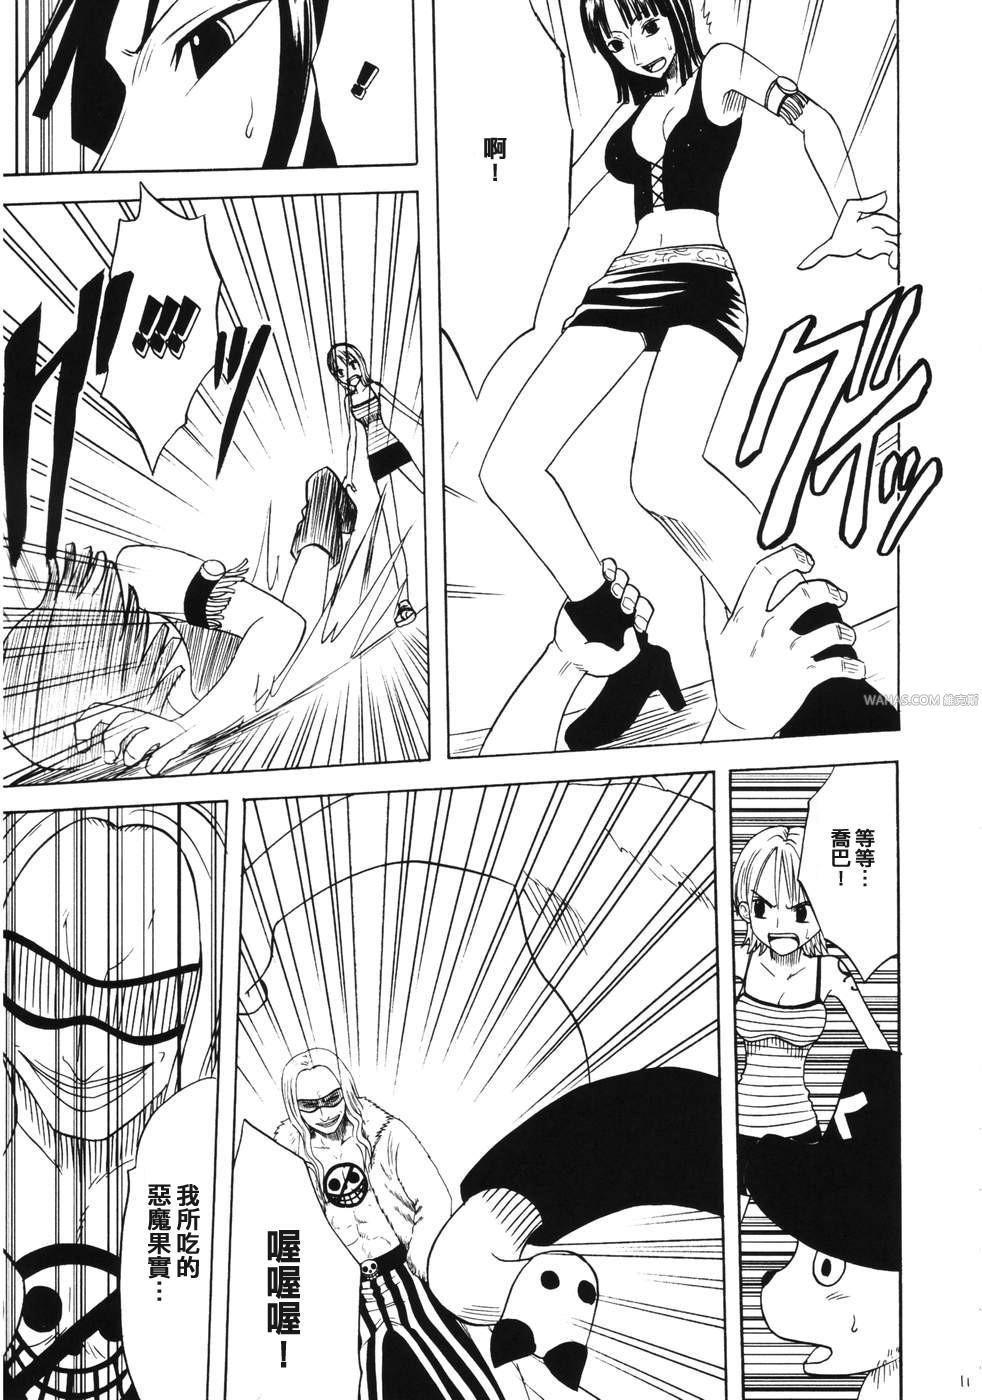 Masterbation Dancing Animation Run - One piece Gorgeous - Page 10